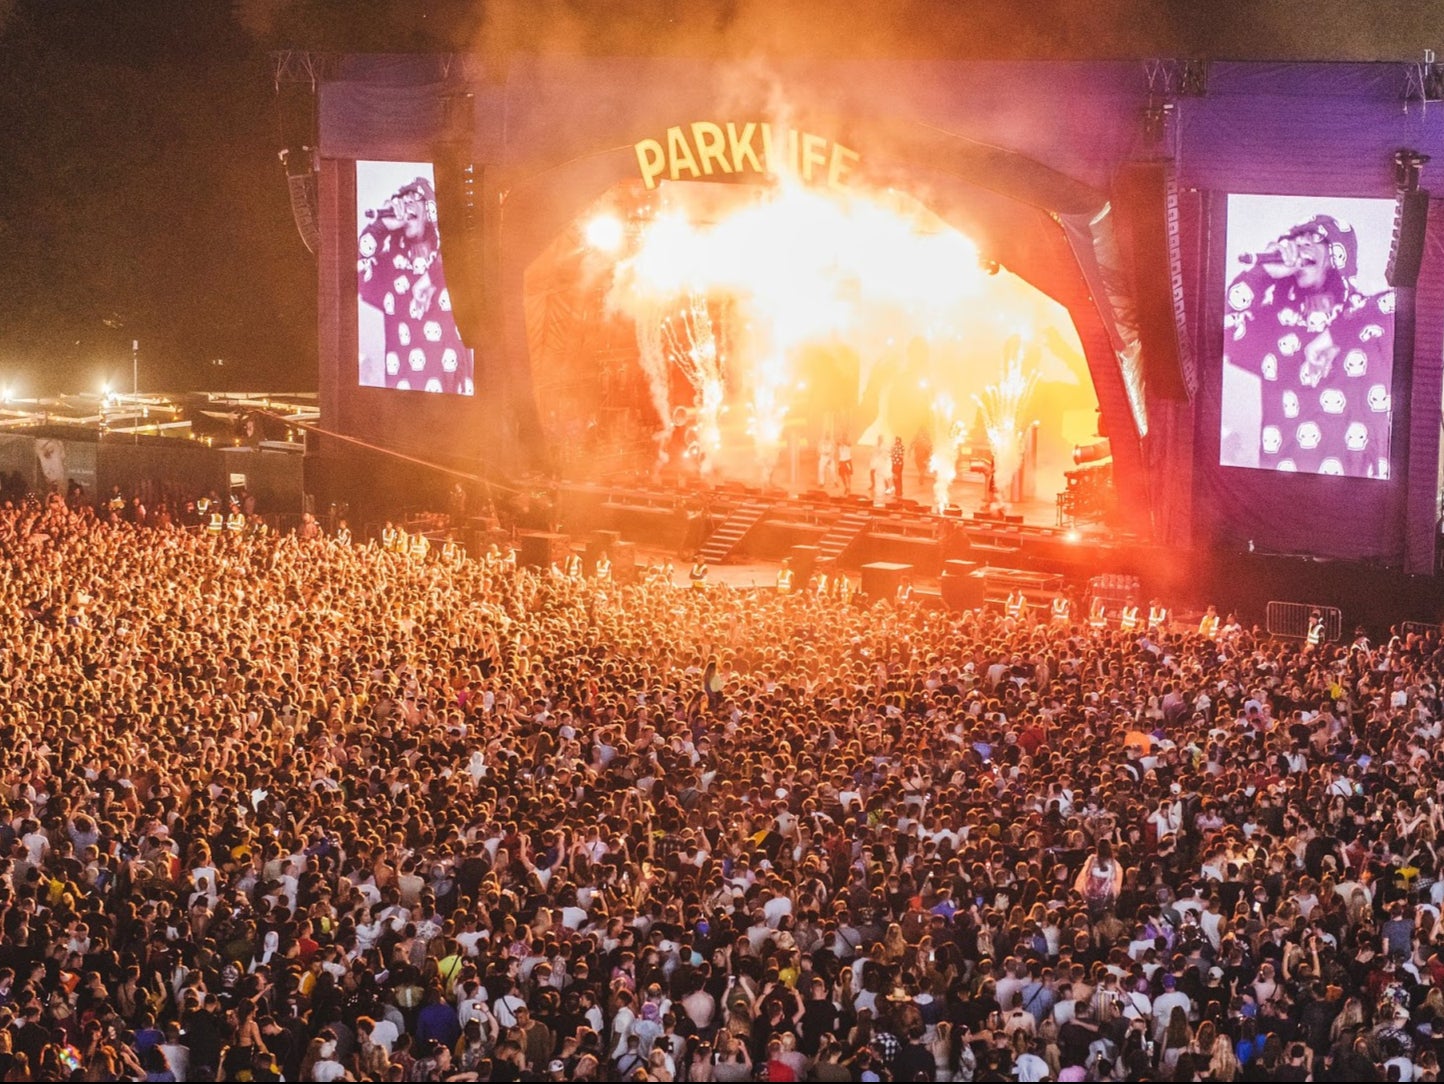 Parklife Festival taking place in 2018